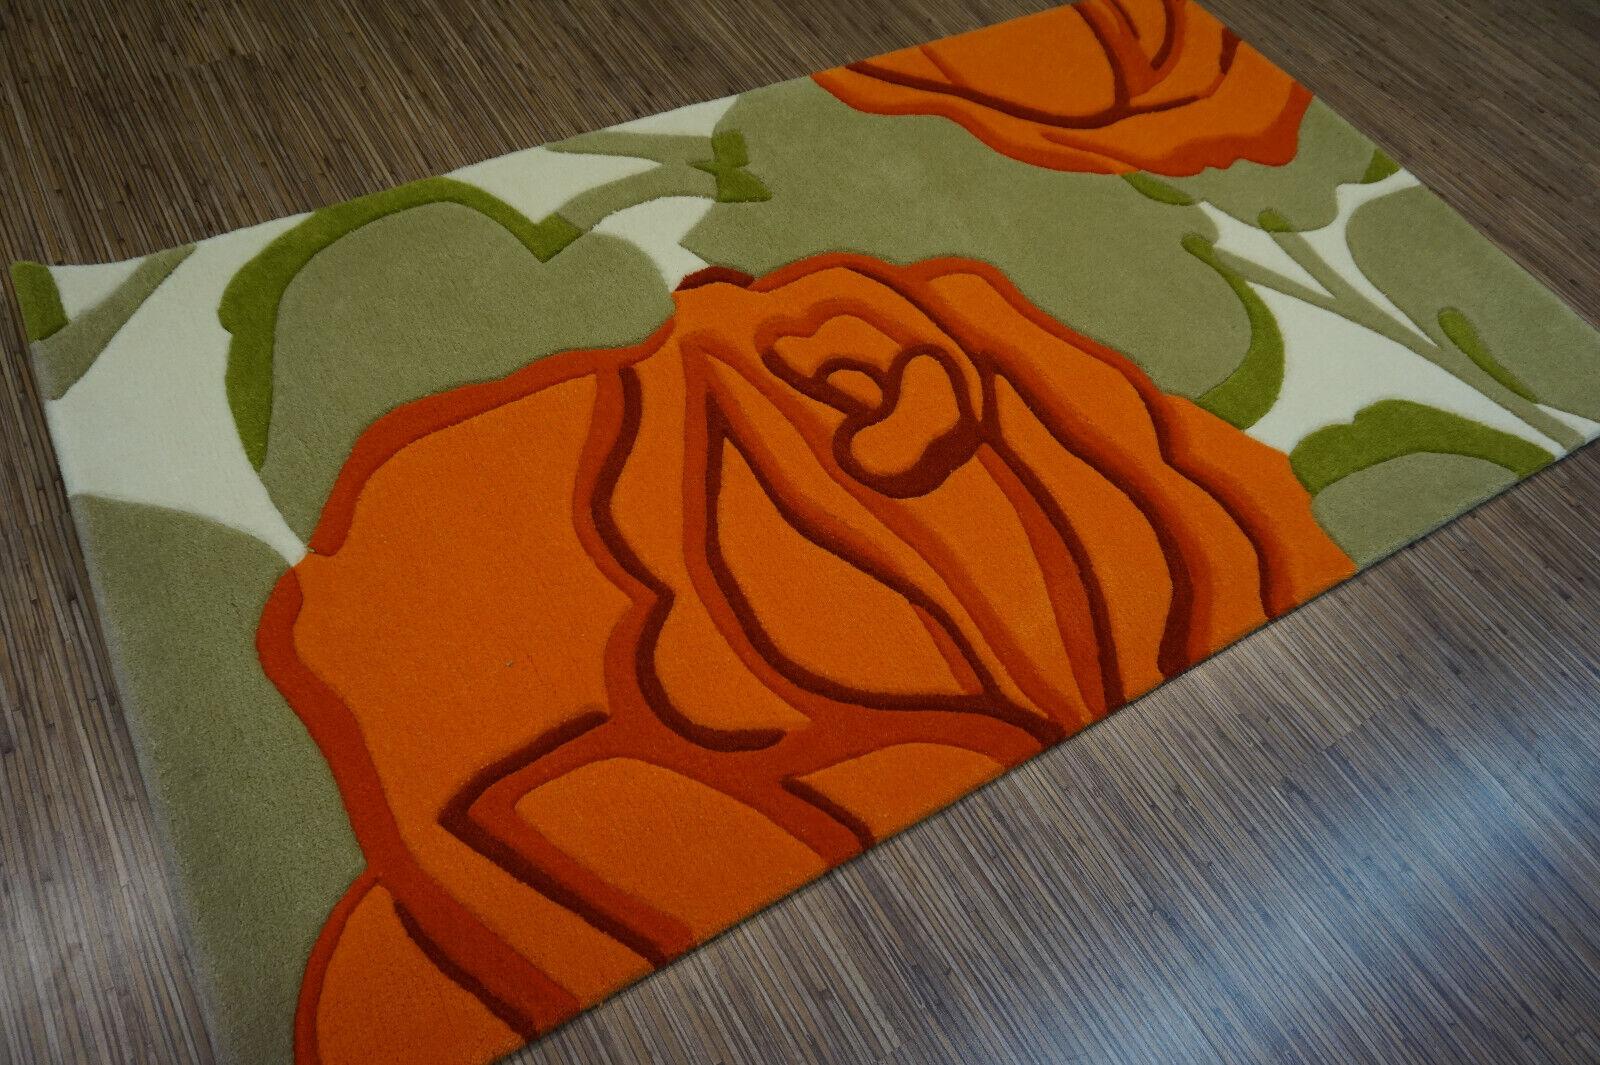 Acrylic Hand-Tufted Vintage Chinese Rug With Roses 2.9' x 5.2', 1990s - 1D39 For Sale